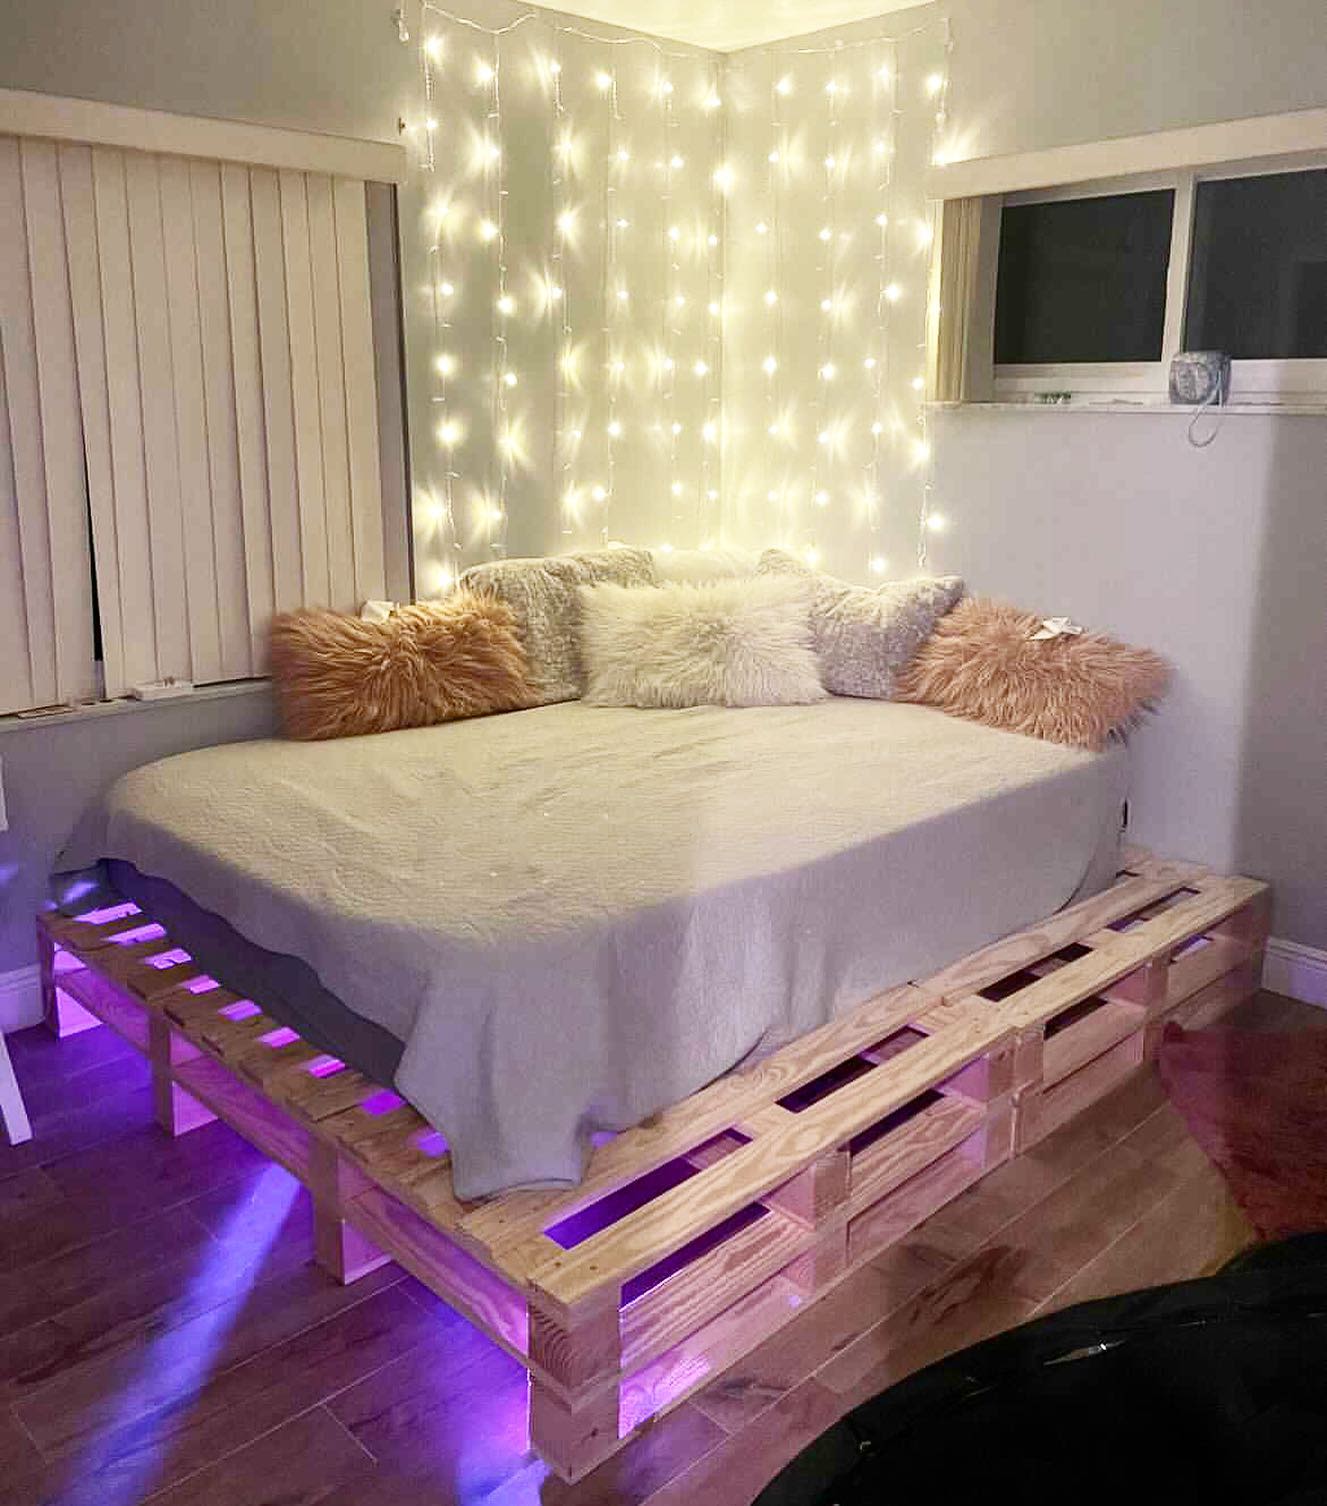 How to build a pallet bed frame